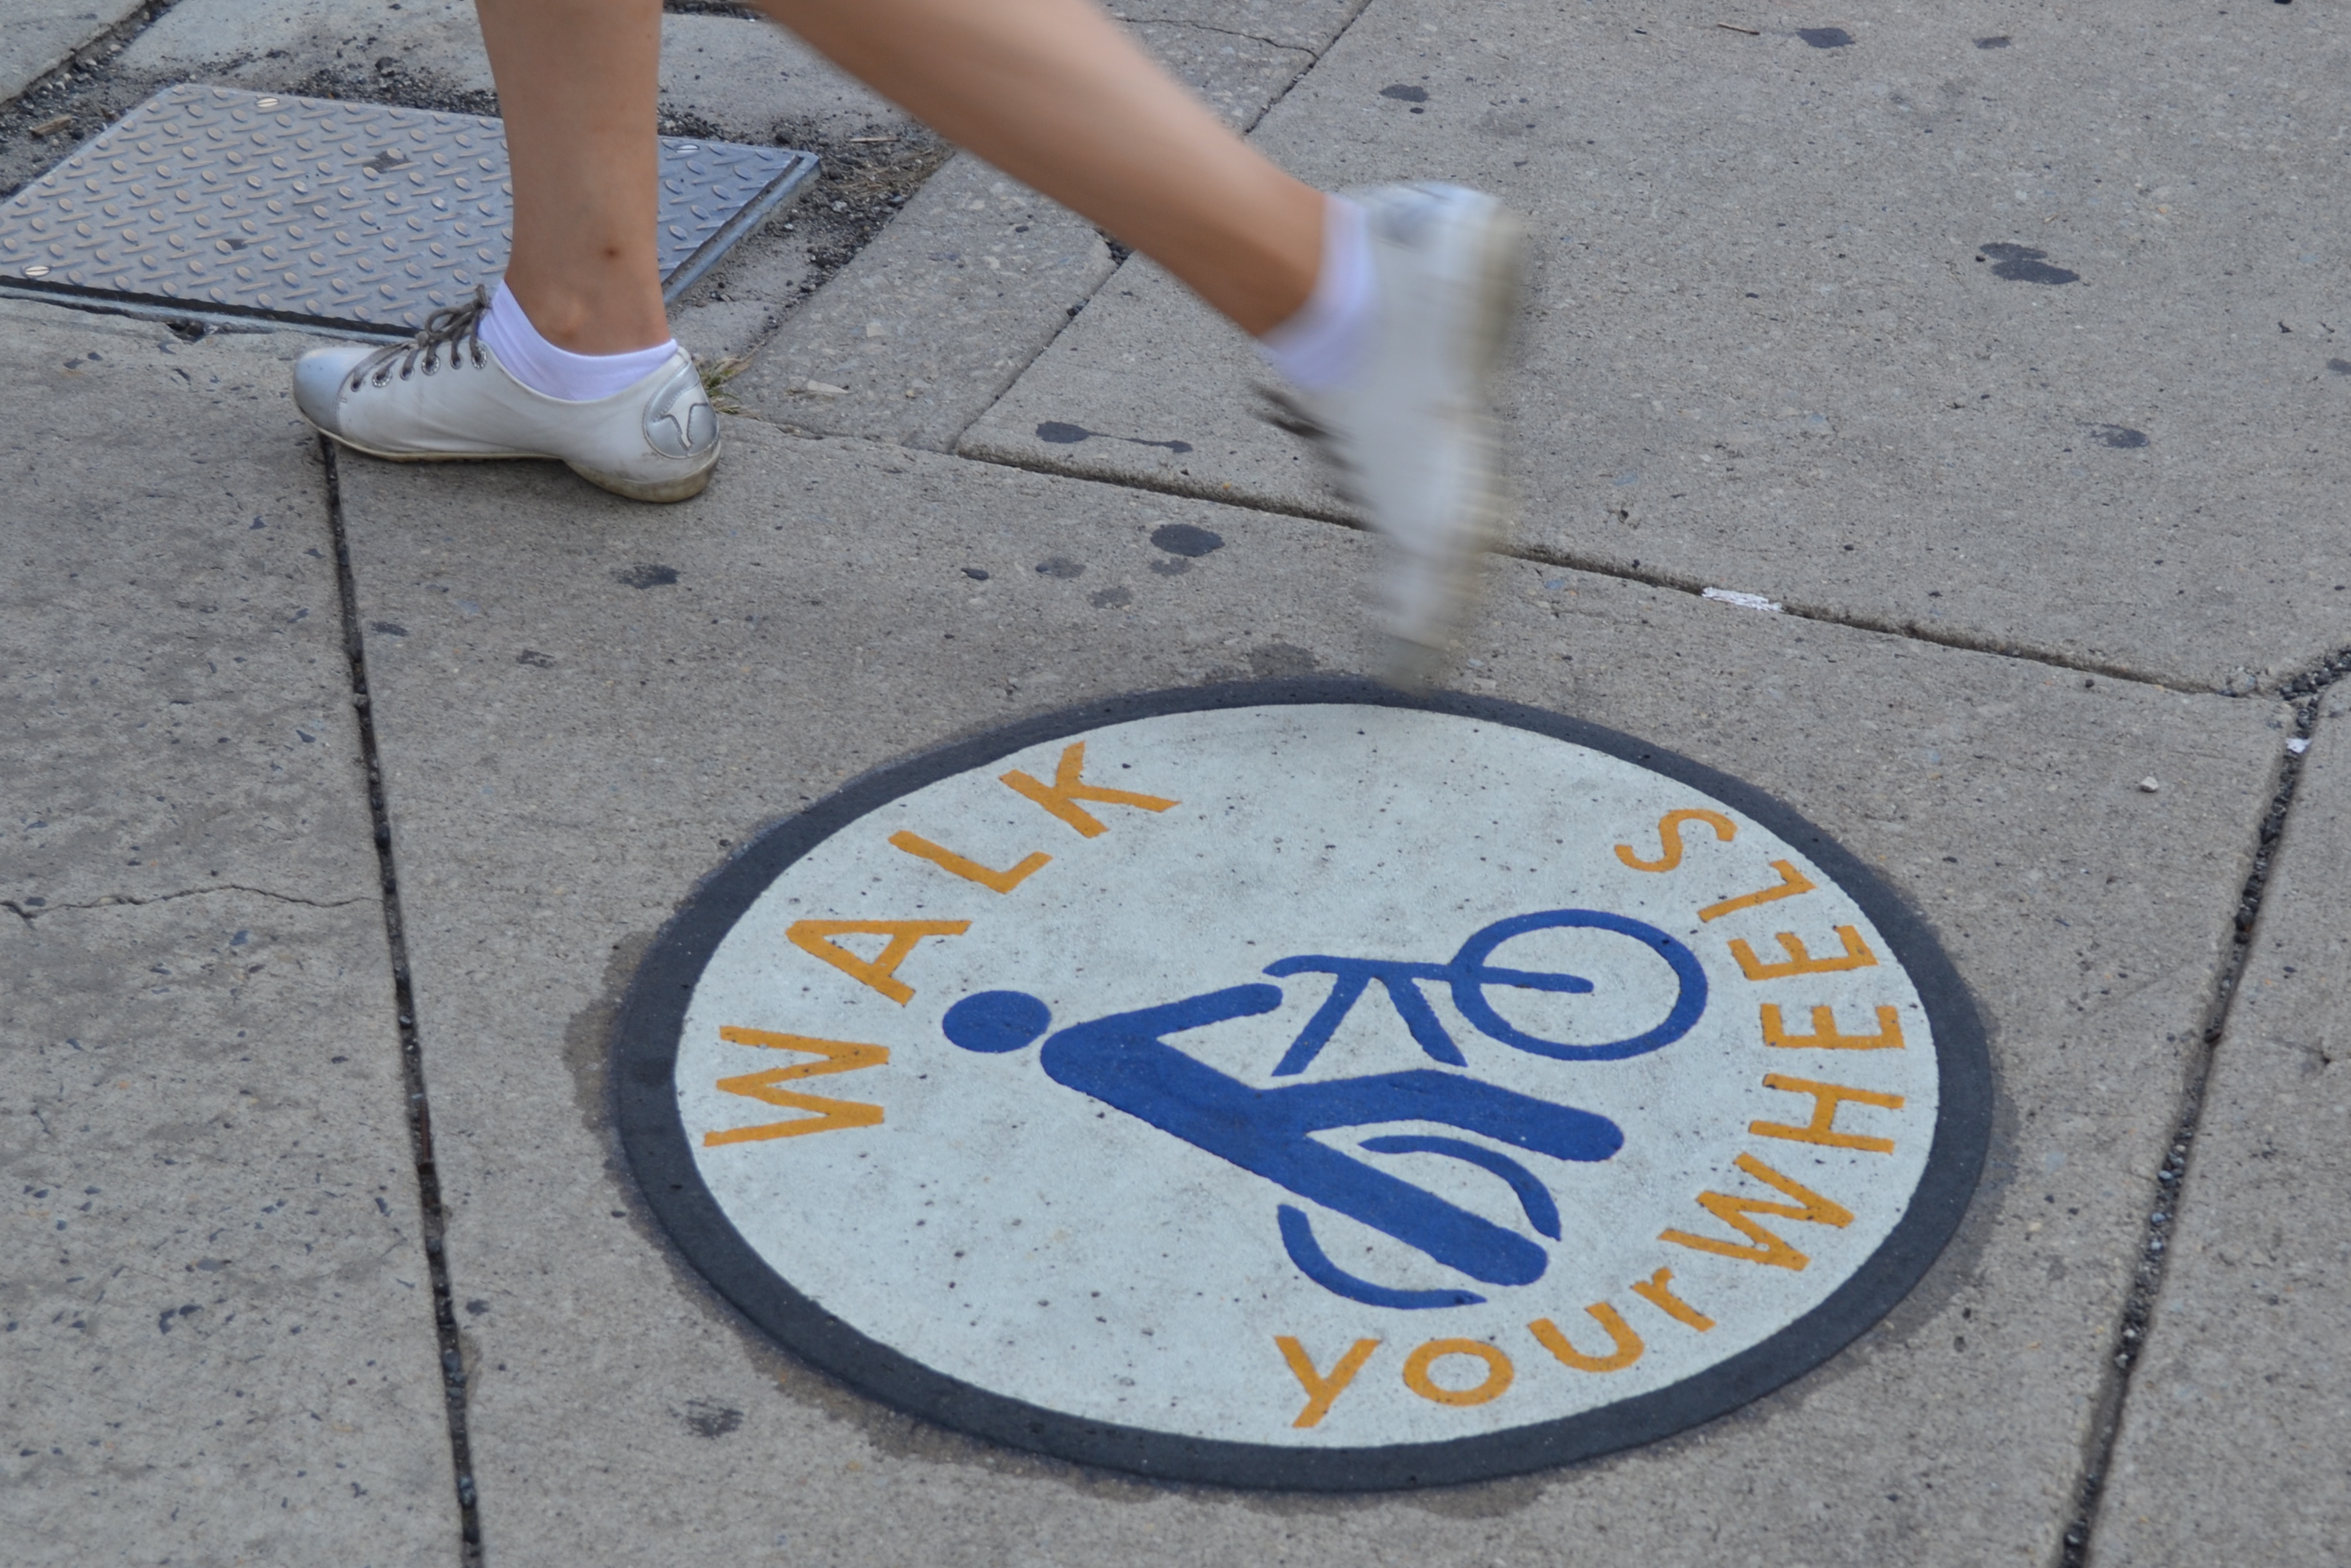 April is for walkers: Several Philly groups will host bicycle and pedestrian events this month